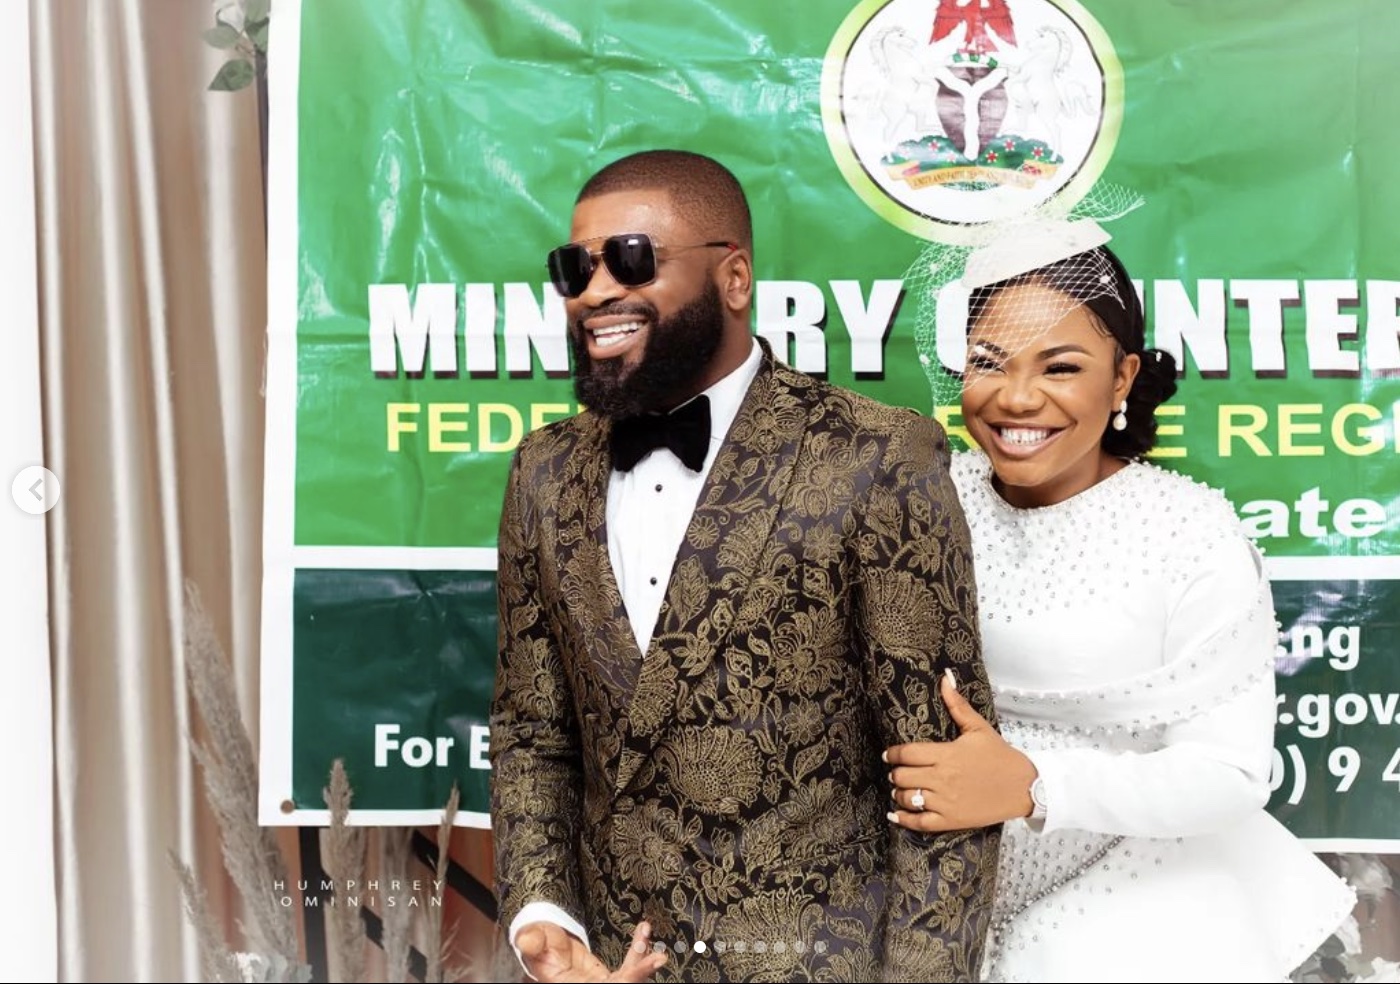 The Happy couple: Mercy Chinwo and Pastor Blessed